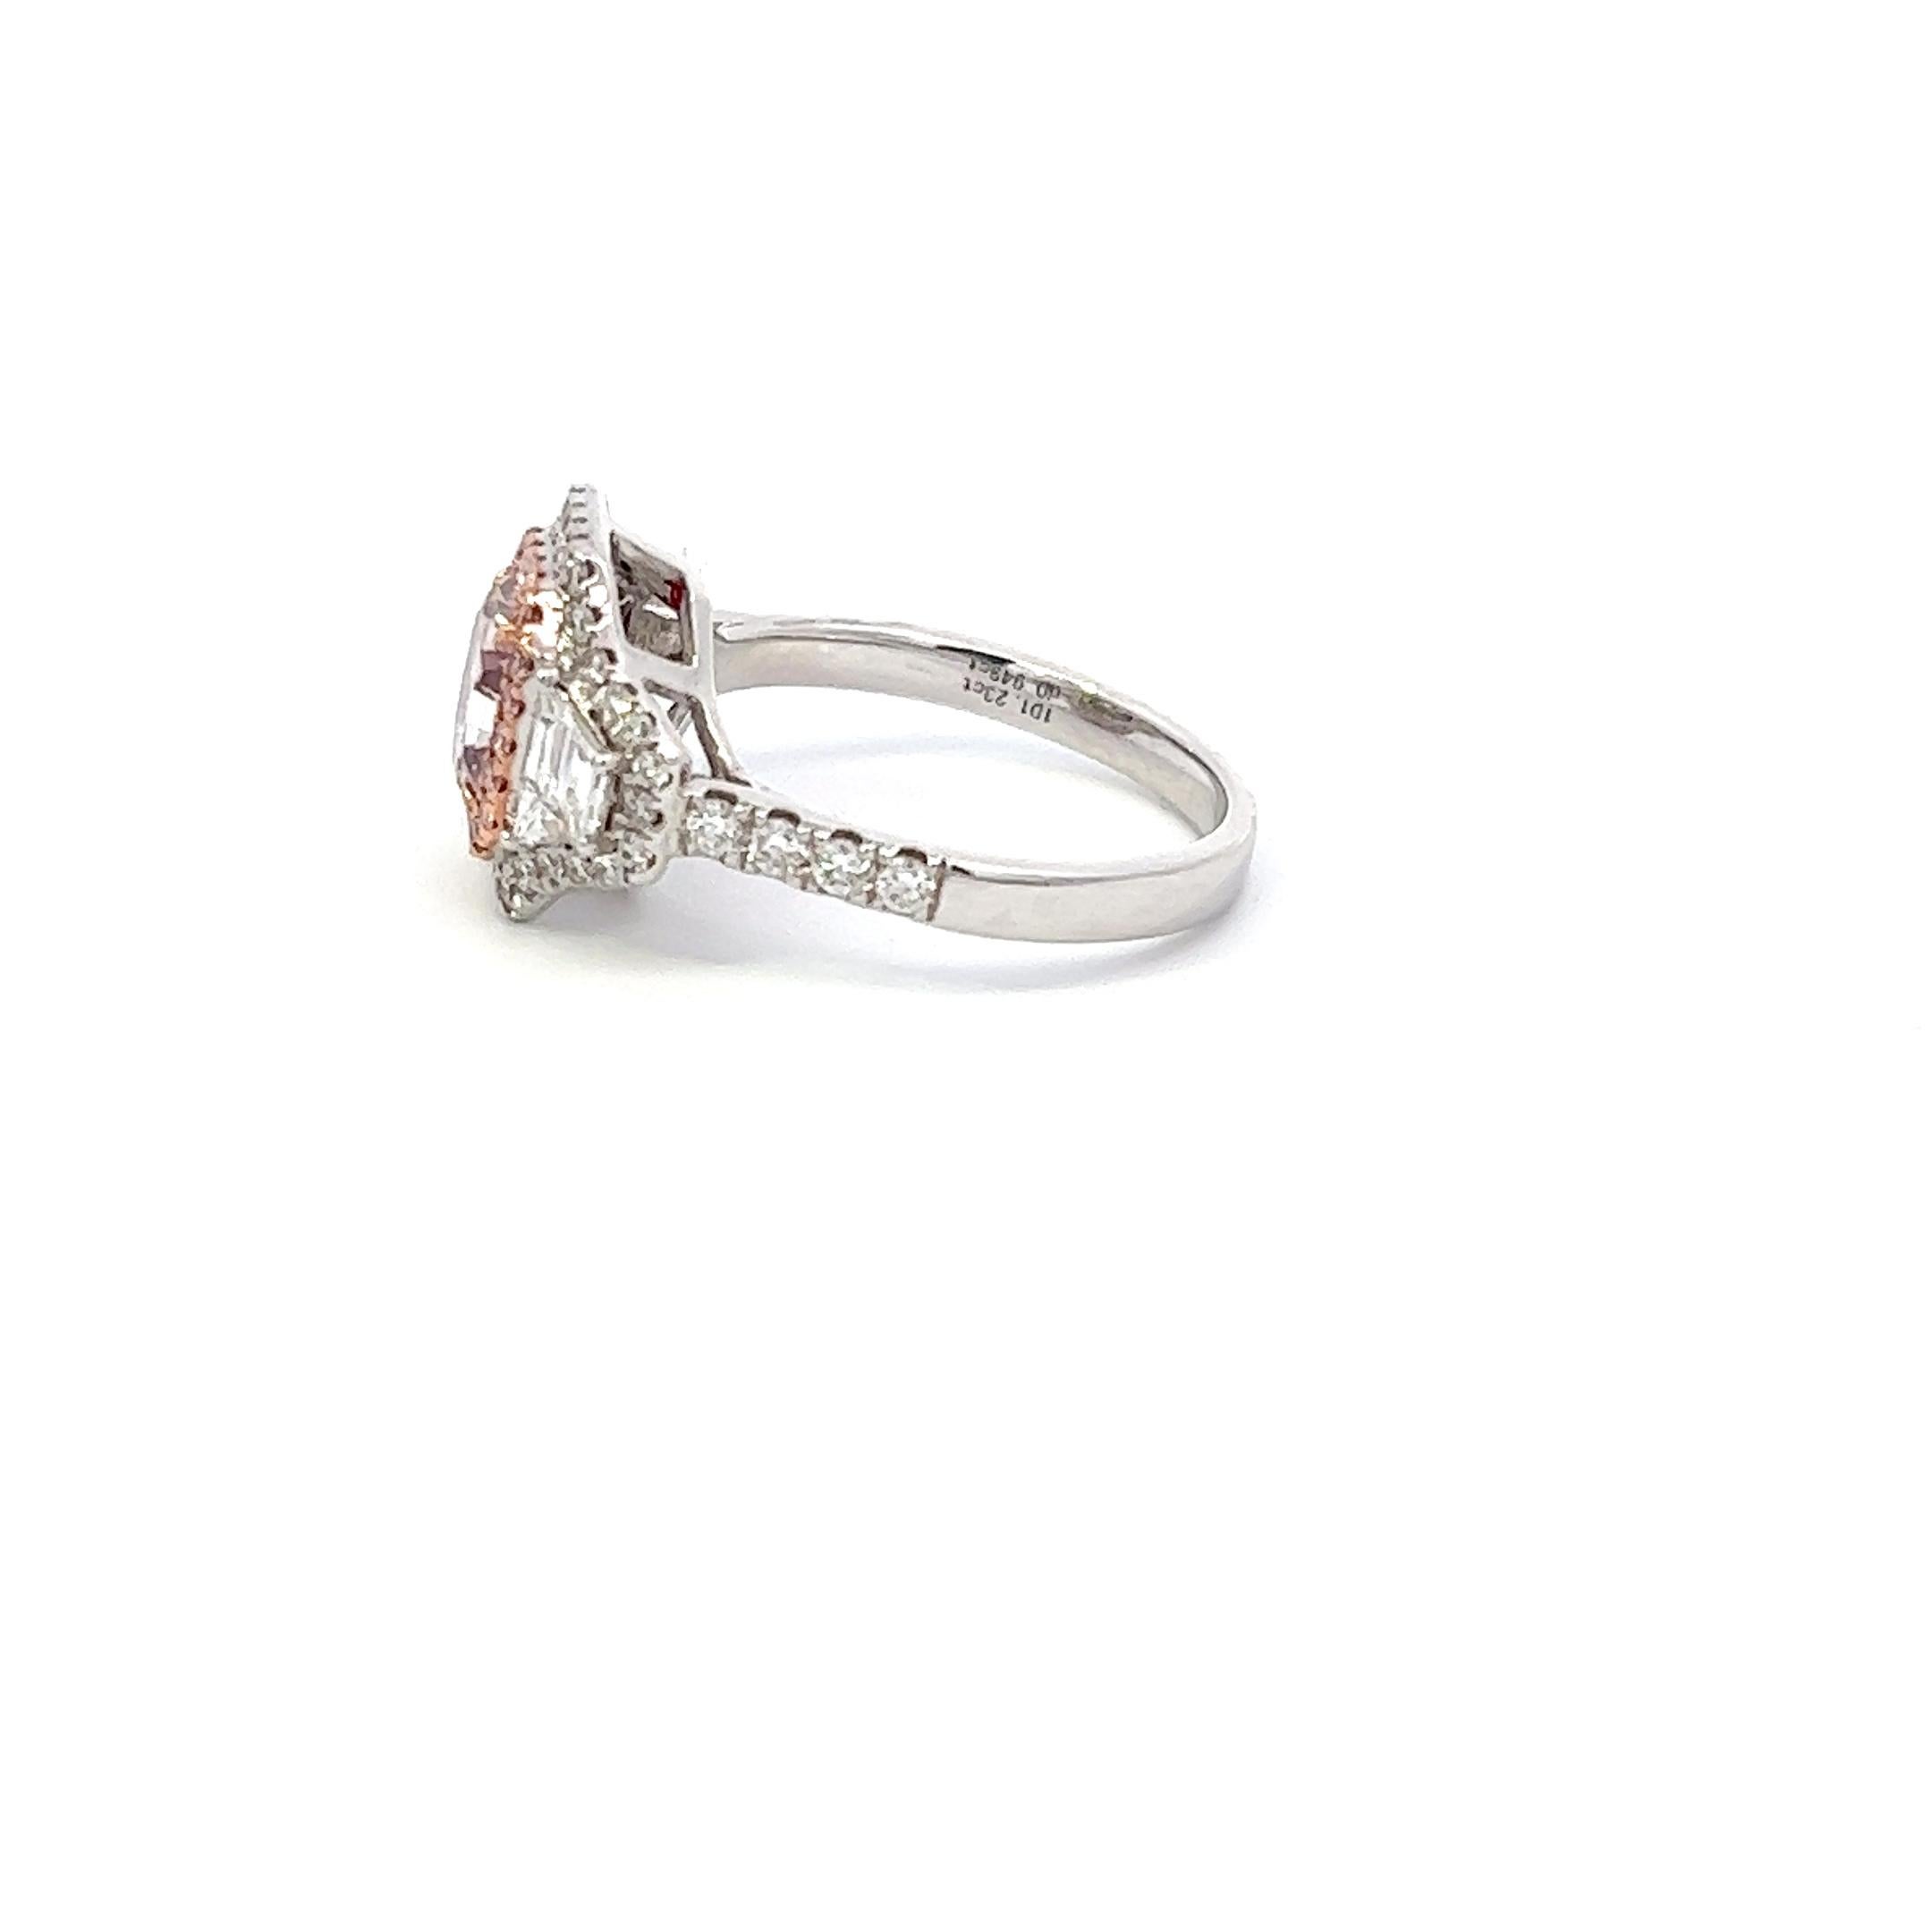 Radiant Cut GIA Certified 1.23 Carat Pink Diamond Ring For Sale